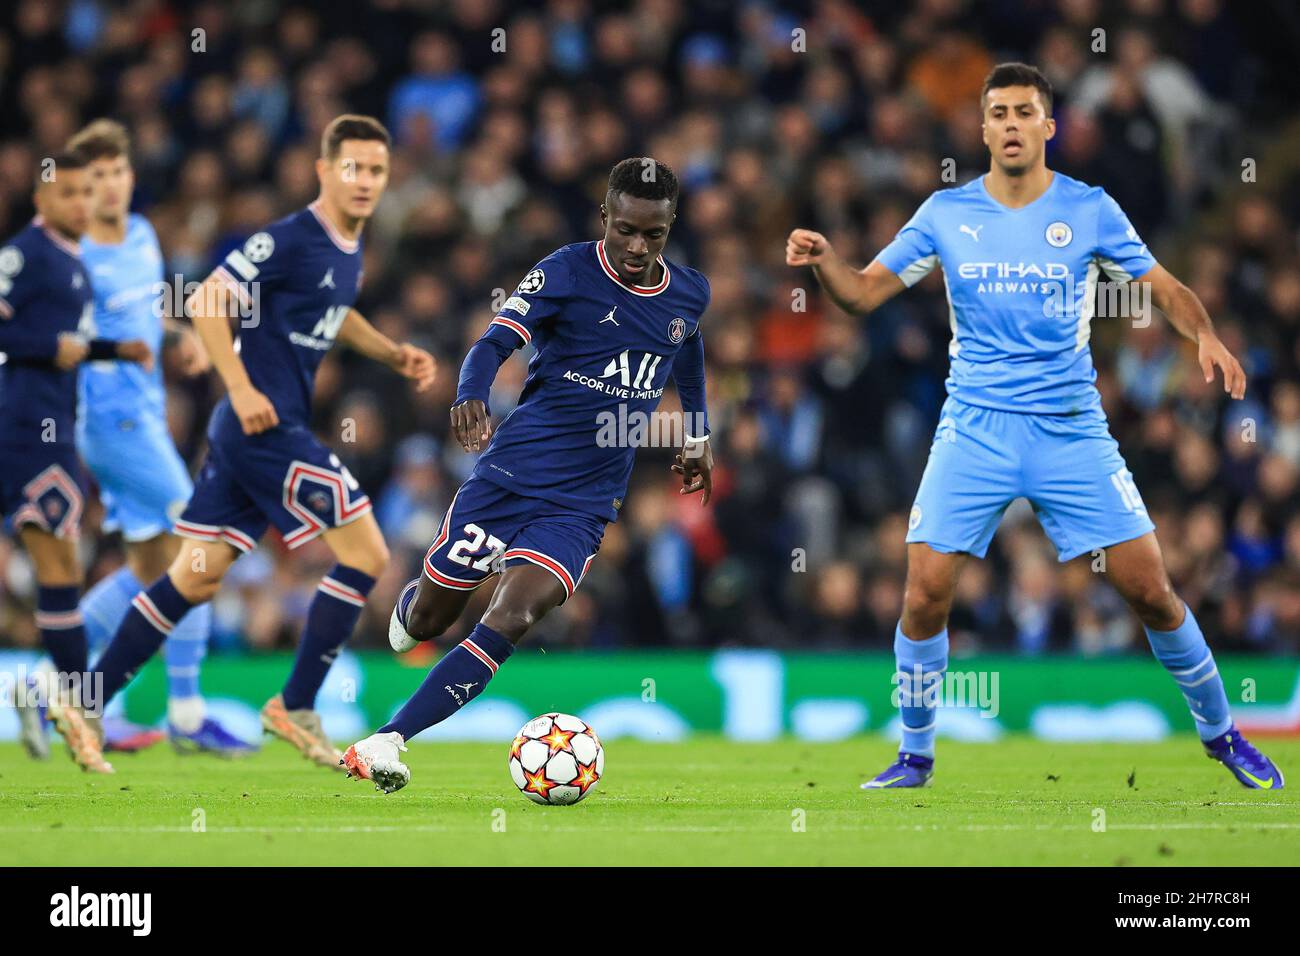 Idrissa Gueye #27 of Paris Saint-Germain in action during the game Stock Photo